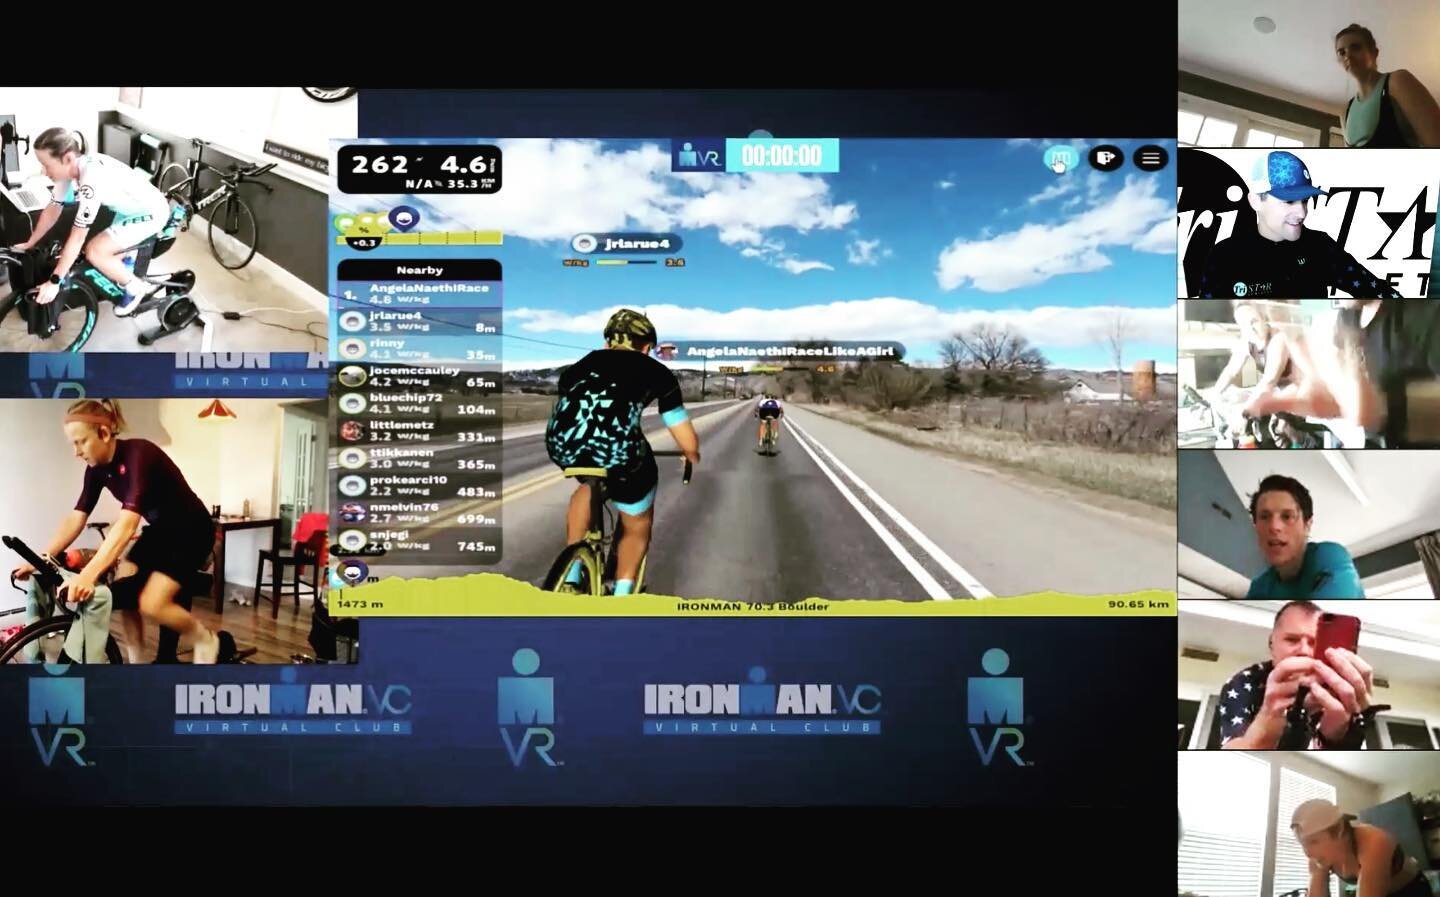 Tristar Virtual Race Camp in action.  Tristars racing together remotely.

Riding along side the pro woman at VR1. #ironmanvr1 #tristarathletes #anywhereispossible 
@ironmantri @gorouvy